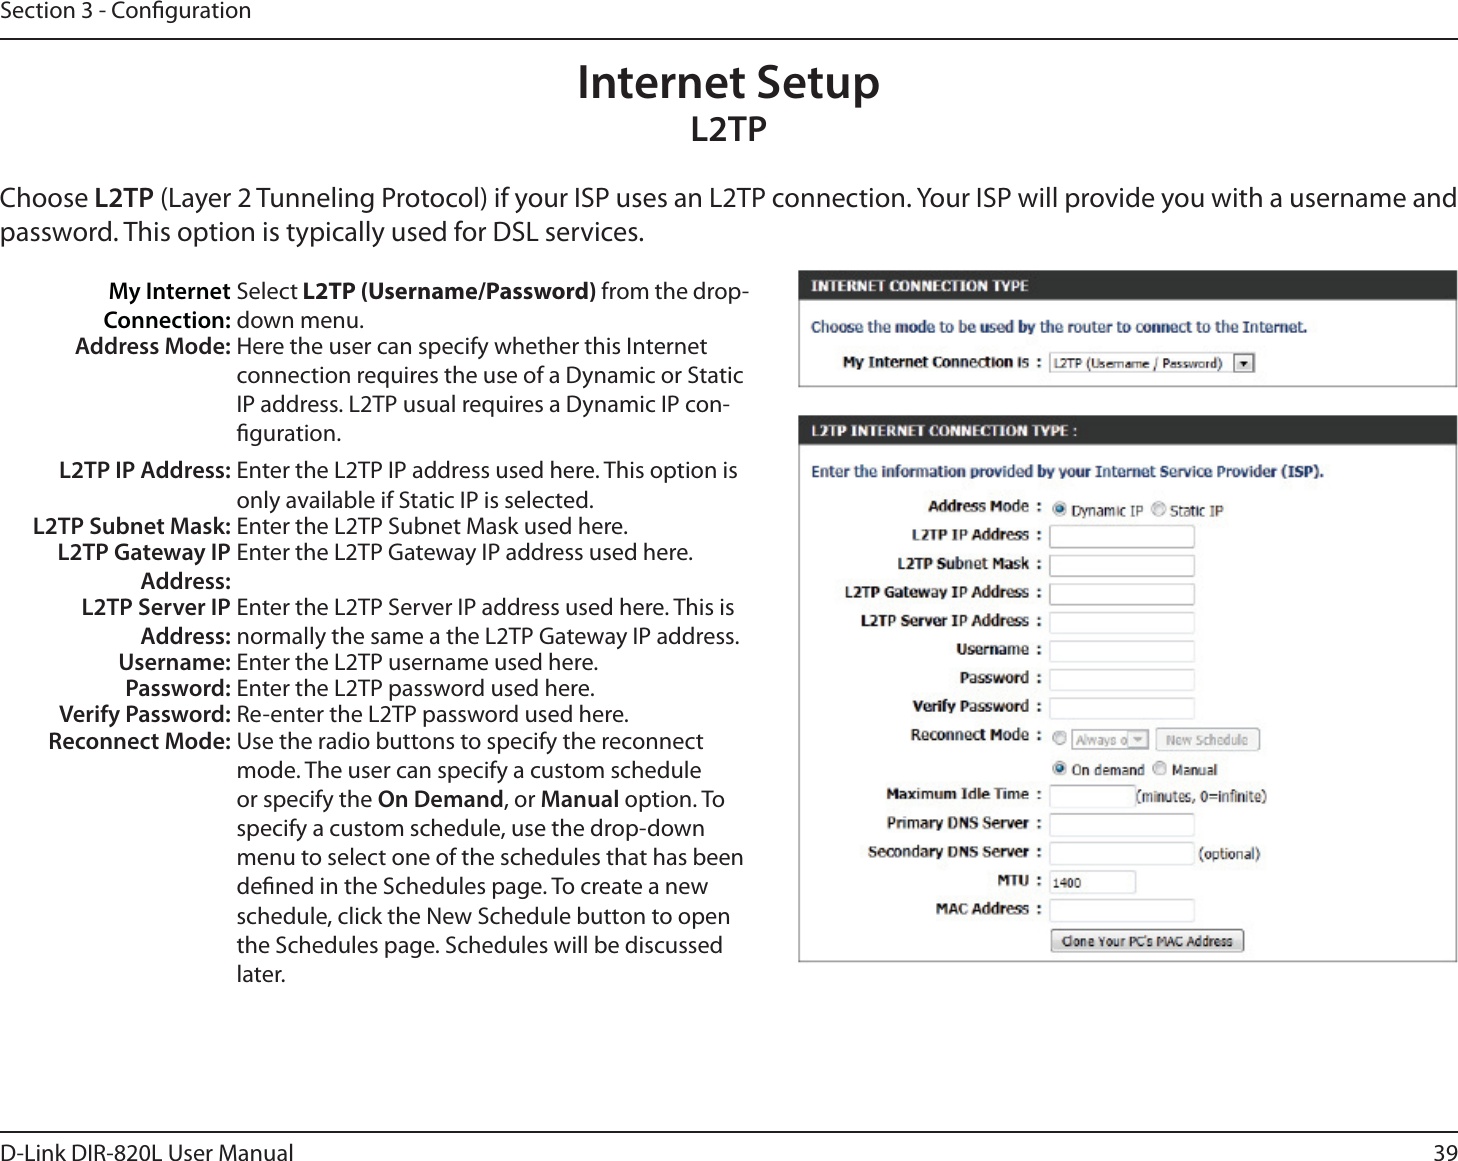 39D-Link DIR-820L User ManualSection 3 - CongurationInternet SetupL2TPChoose L2TP (Layer 2 Tunneling Protocol) if your ISP uses an L2TP connection. Your ISP will provide you with a username and password. This option is typically used for DSL services. My Internet Connection:Select L2TP (Username/Password) from the drop-down menu.Address Mode: Here the user can specify whether this Internet connection requires the use of a Dynamic or Static IP address. L2TP usual requires a Dynamic IP con-guration.L2TP IP Address: Enter the L2TP IP address used here. This option is only available if Static IP is selected.L2TP Subnet Mask: Enter the L2TP Subnet Mask used here.L2TP Gateway IP Address:Enter the L2TP Gateway IP address used here.L2TP Server IP Address:Enter the L2TP Server IP address used here. This is normally the same a the L2TP Gateway IP address.Username: Enter the L2TP username used here.Password: Enter the L2TP password used here.Verify Password: Re-enter the L2TP password used here.Reconnect Mode: Use the radio buttons to specify the reconnect mode. The user can specify a custom schedule or specify the On Demand, or Manual option. To specify a custom schedule, use the drop-down menu to select one of the schedules that has been dened in the Schedules page. To create a new schedule, click the New Schedule button to open the Schedules page. Schedules will be discussed later.